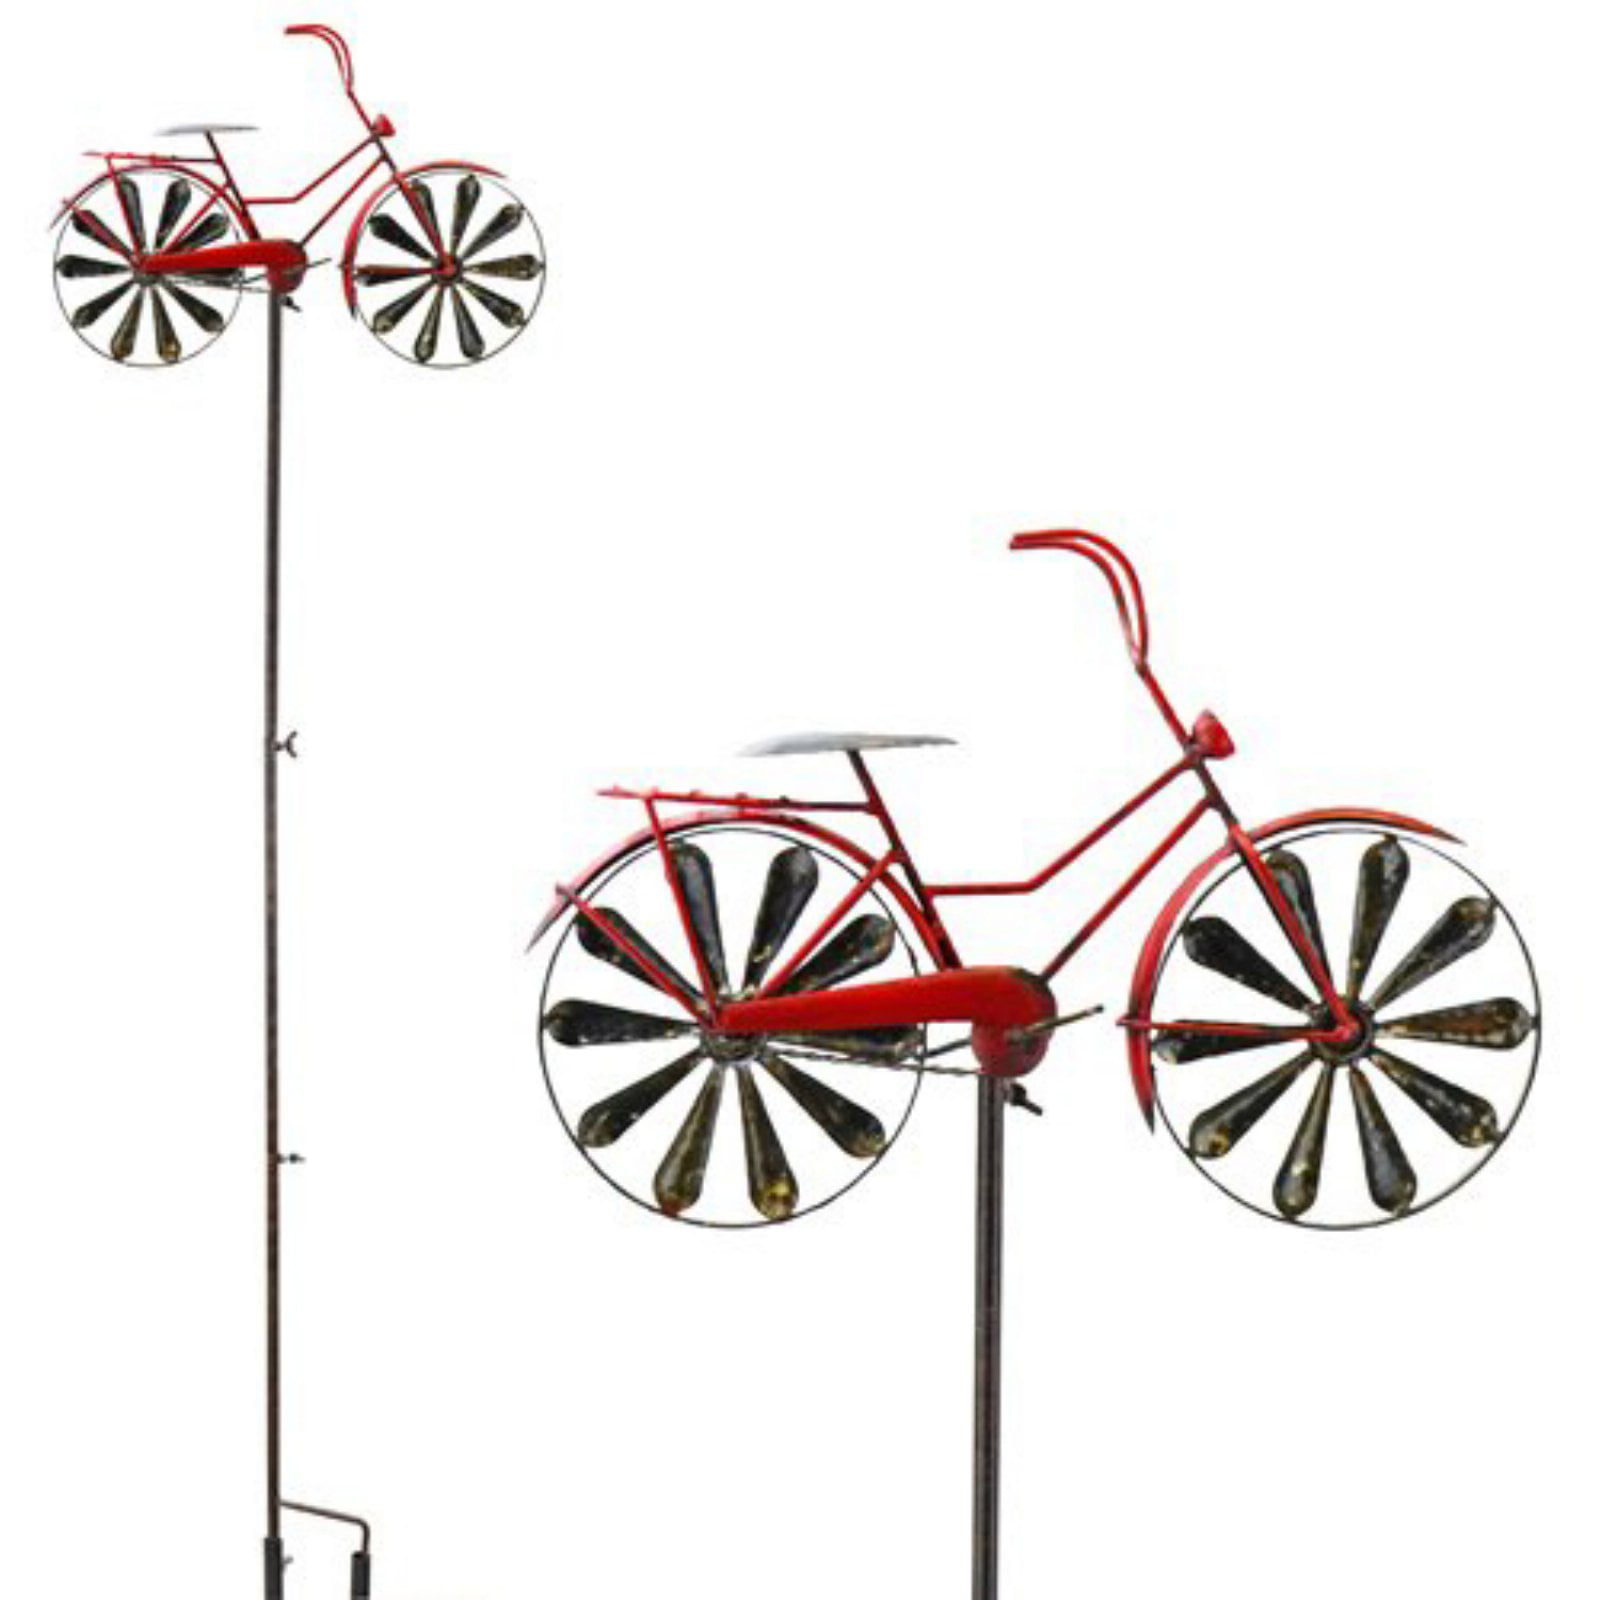 Details about   Rustic Bike Wind Spinner Bicycle Kinetic Garden Stake Lawn Patio Yard Decor Art 